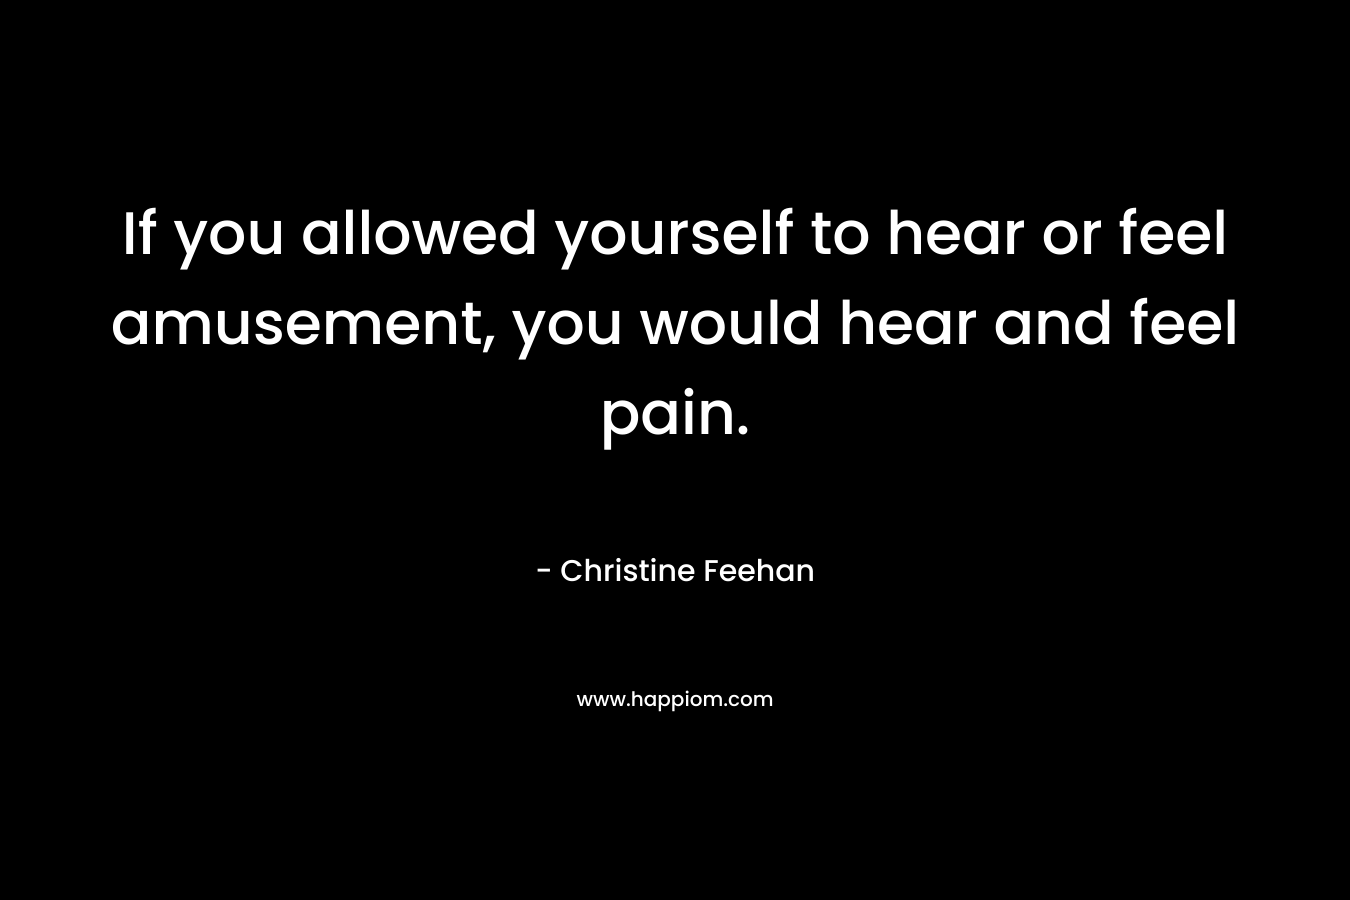 If you allowed yourself to hear or feel amusement, you would hear and feel pain.